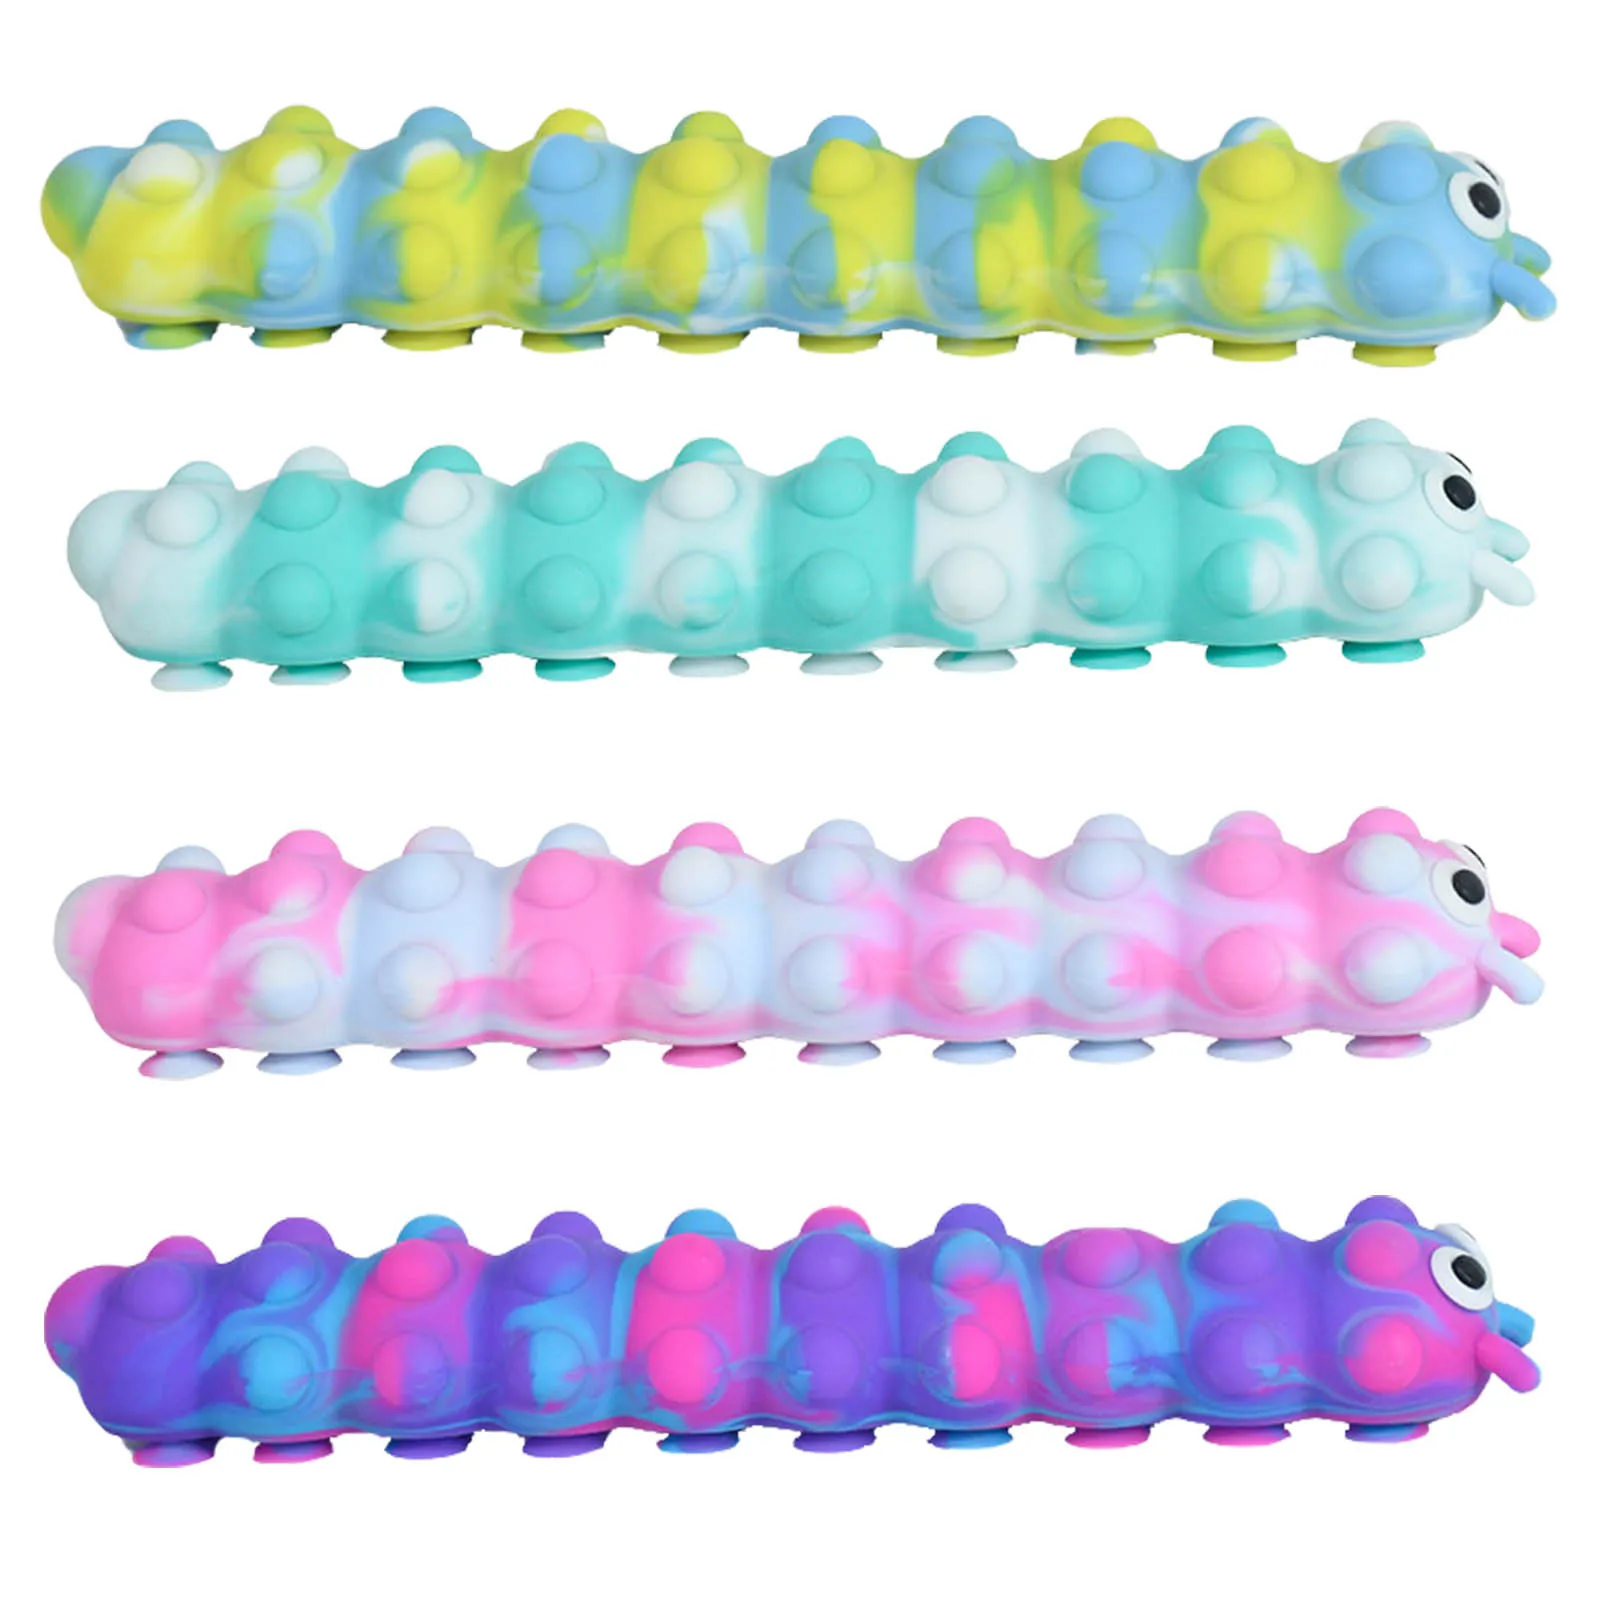 Suction Cup Caterpillar Shape Pat Silicone Sheet Squidopop Fidgets Toy Children Stress Relief Squeeze Toy Antistress Soft Squish